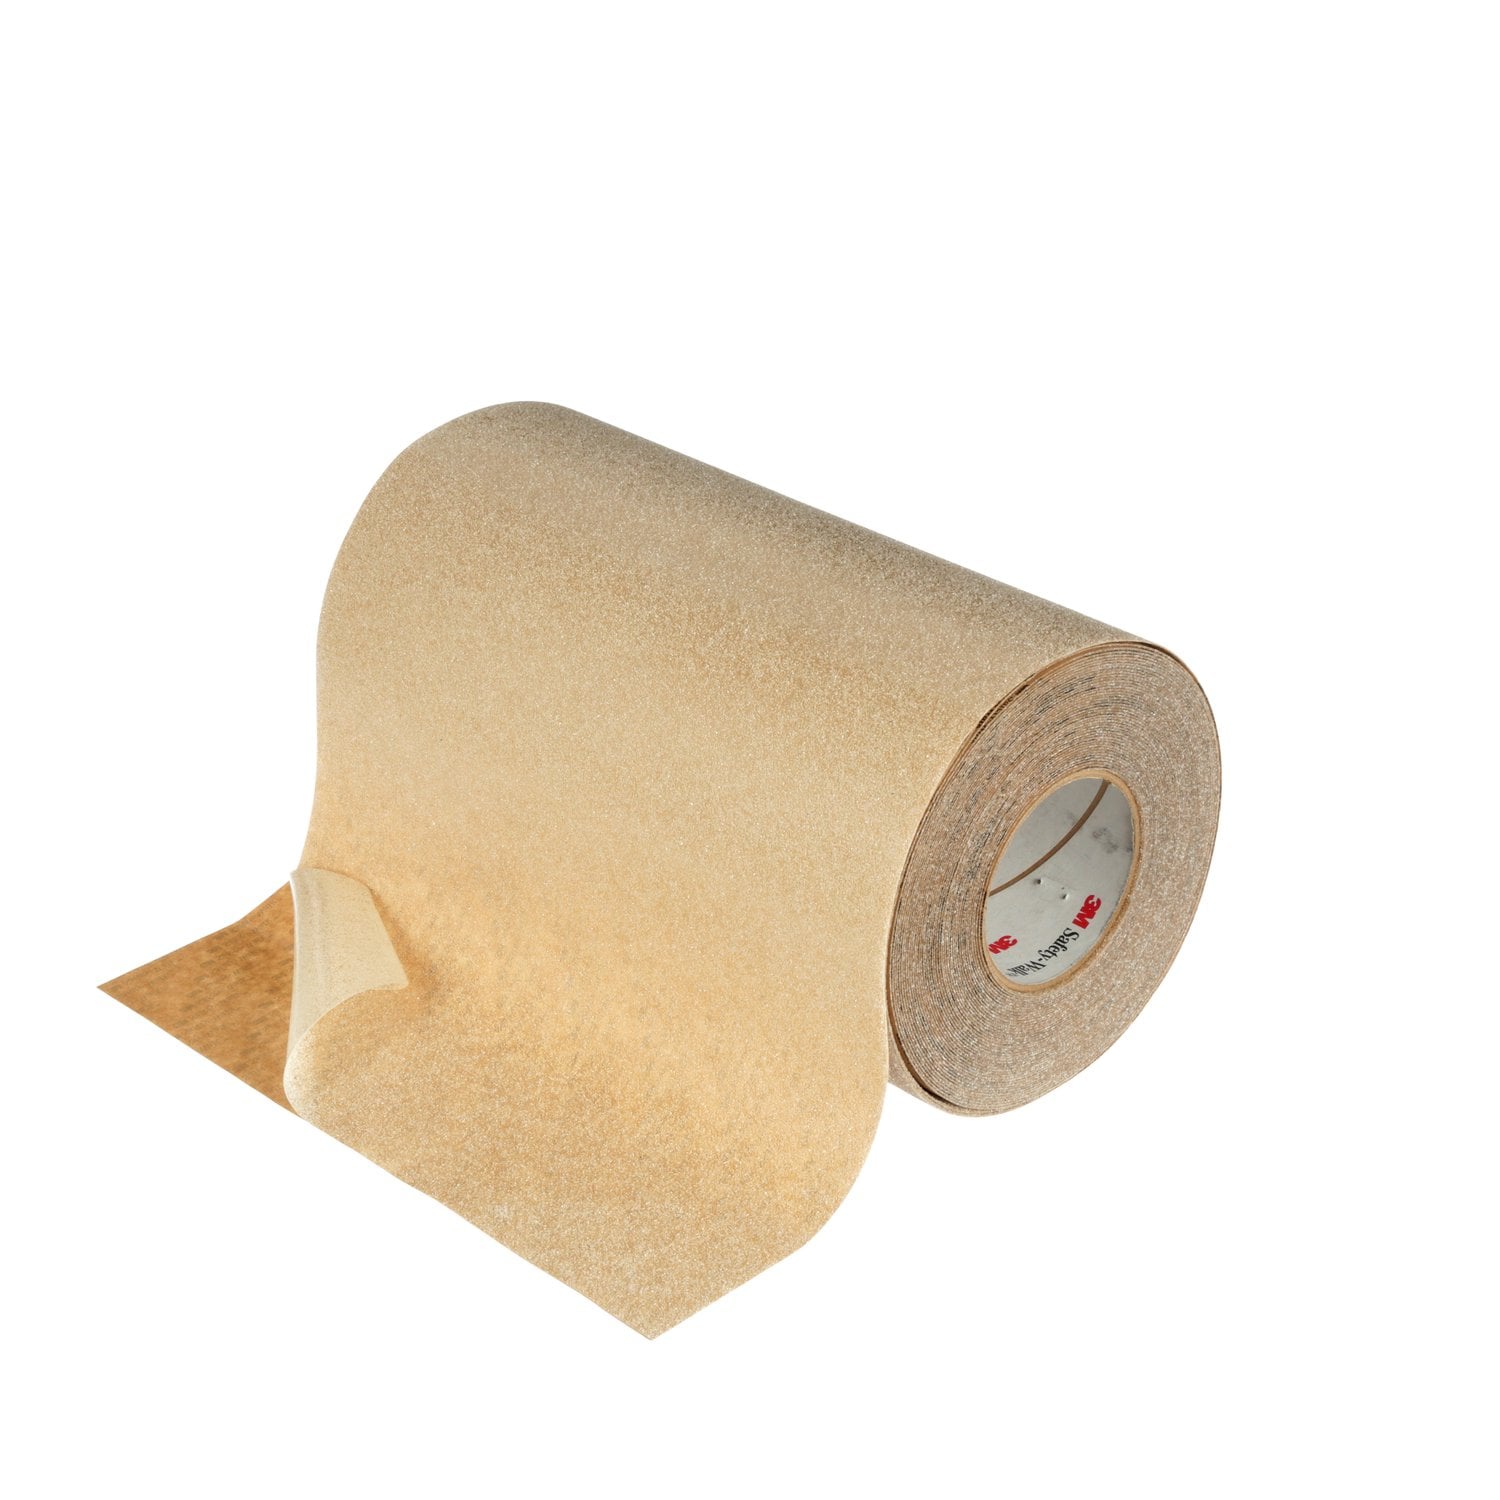 7100120525 - 3M Safety-Walk Slip-Resistant General Purpose Tapes & Treads 620,
Clear, 2 inch Wide & Over, Configurable Roll